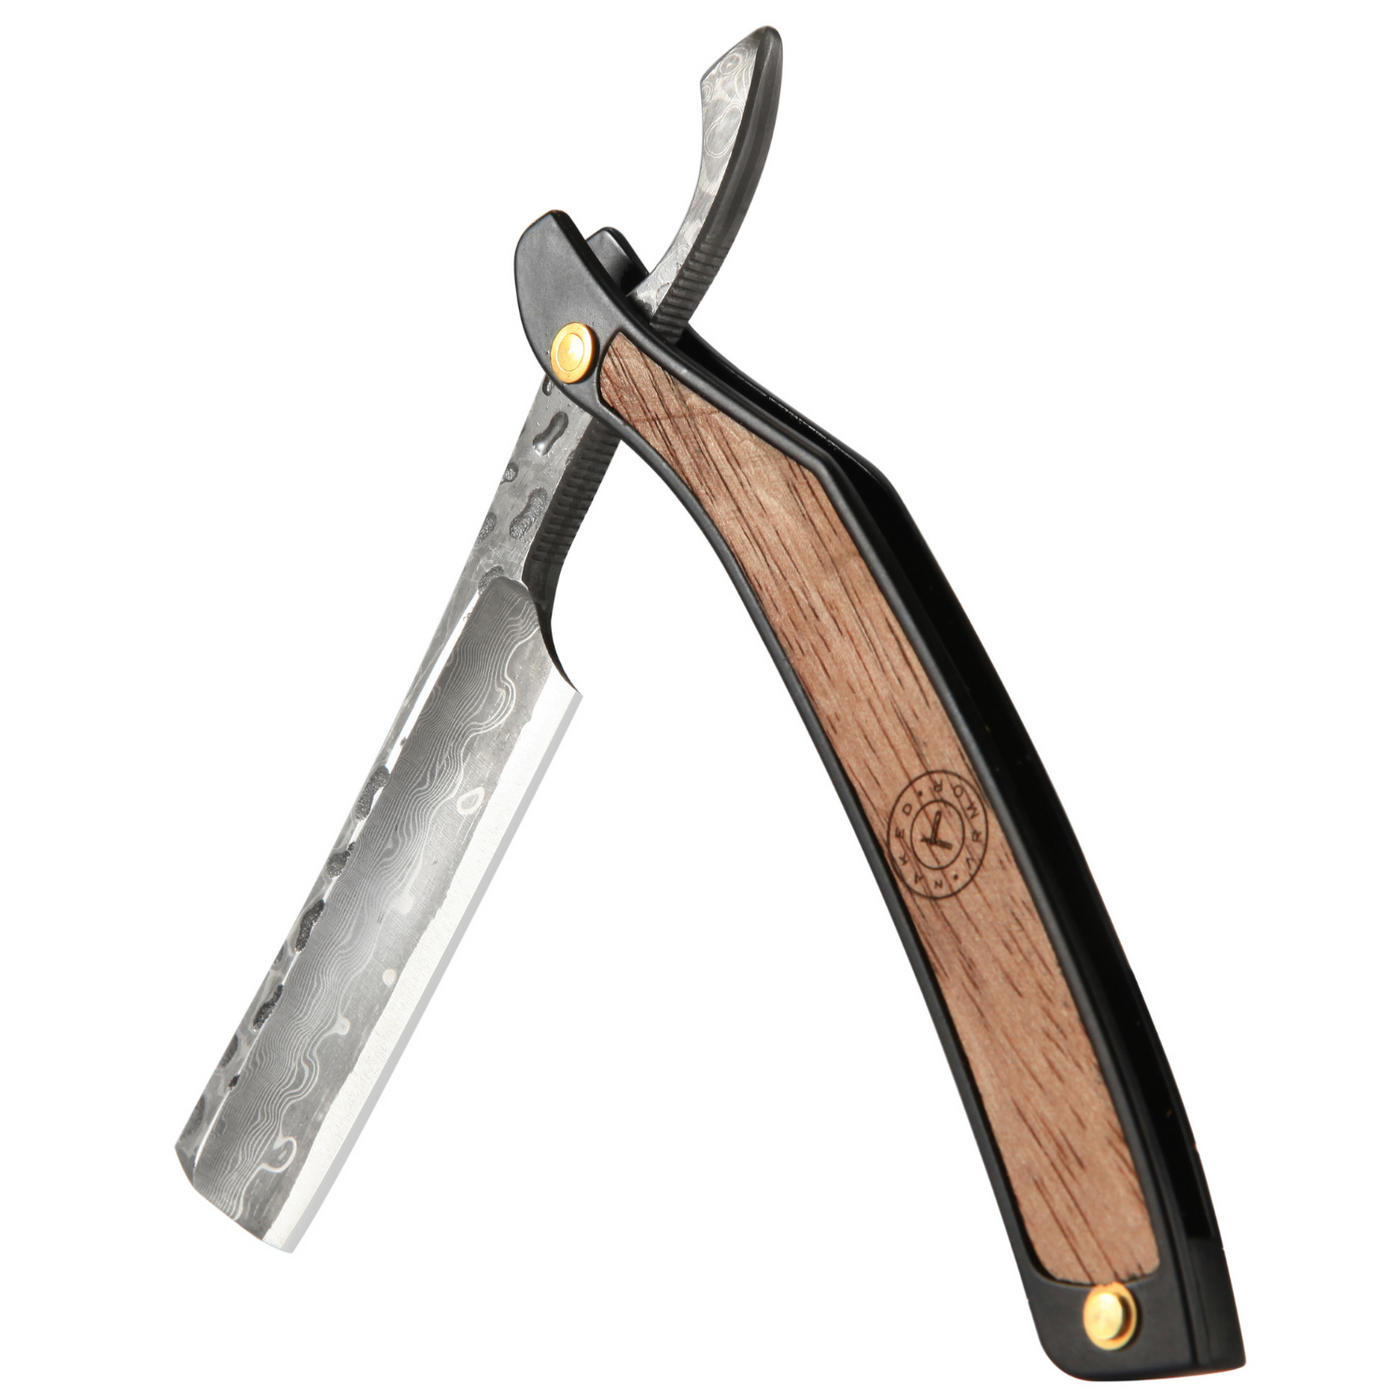  Drian Damascus Straight Razor by Naked Armor sold by Naked Armor Razors